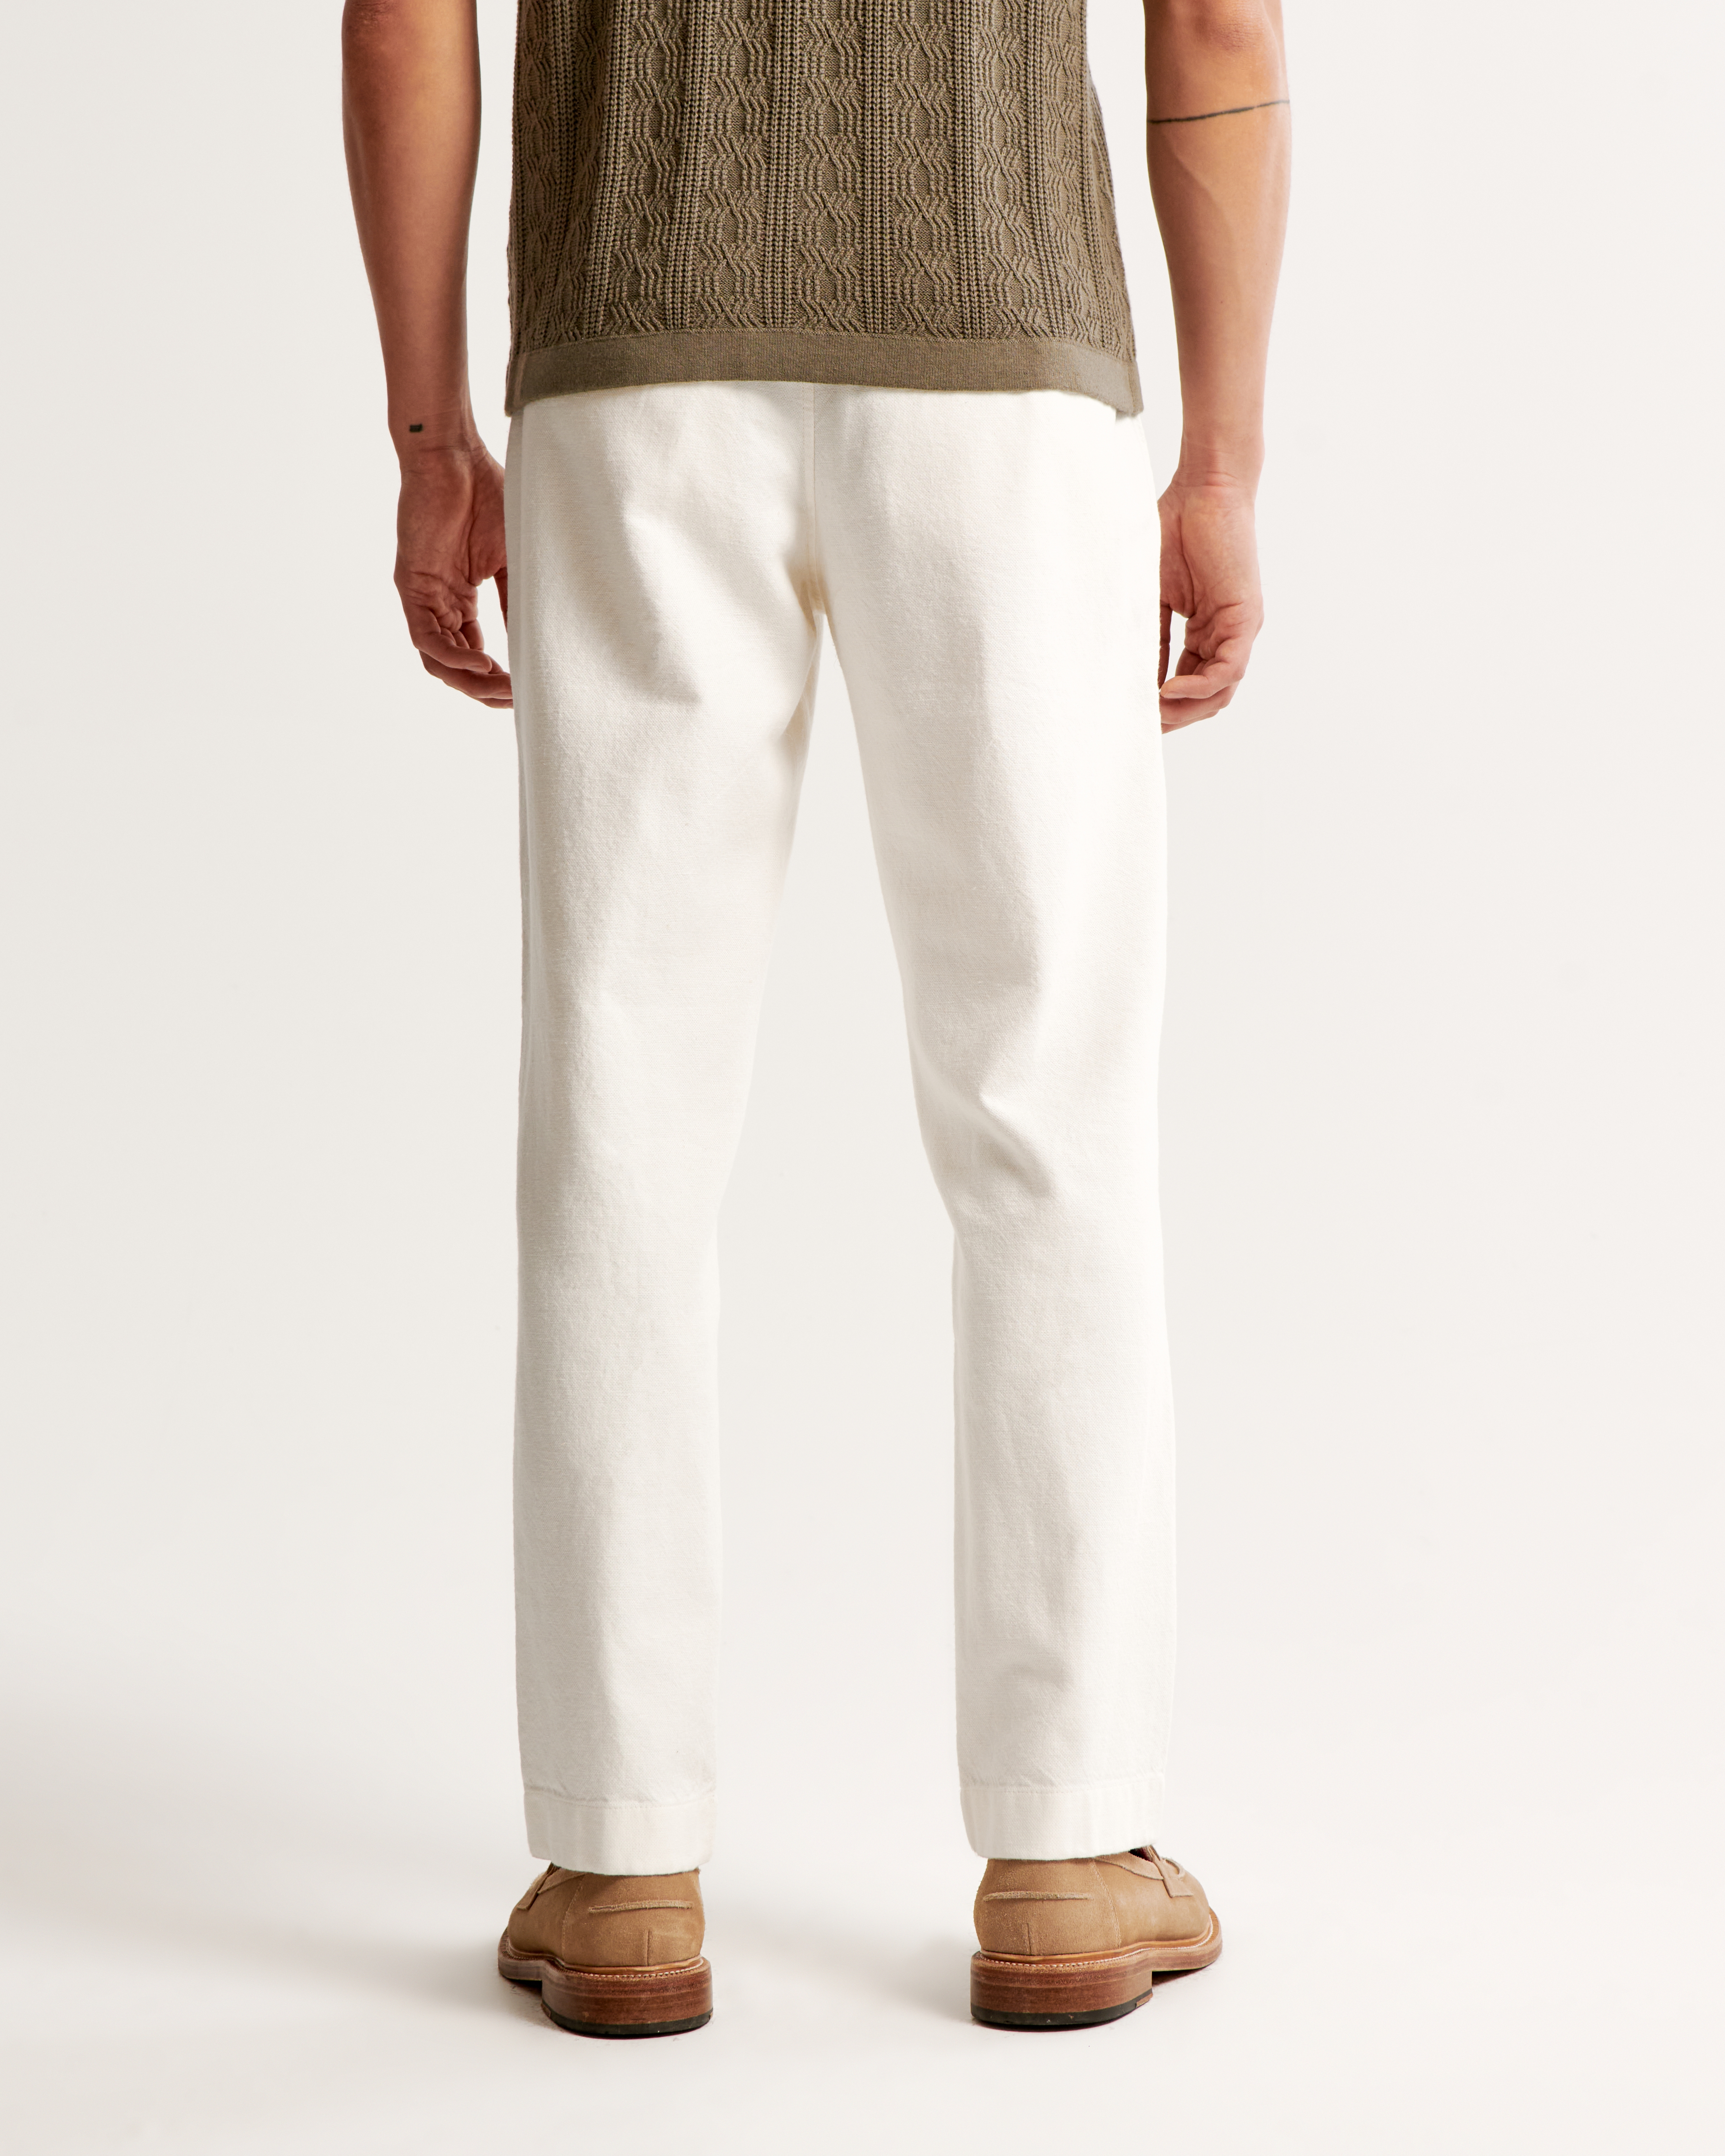 Linen and cotton straight pants